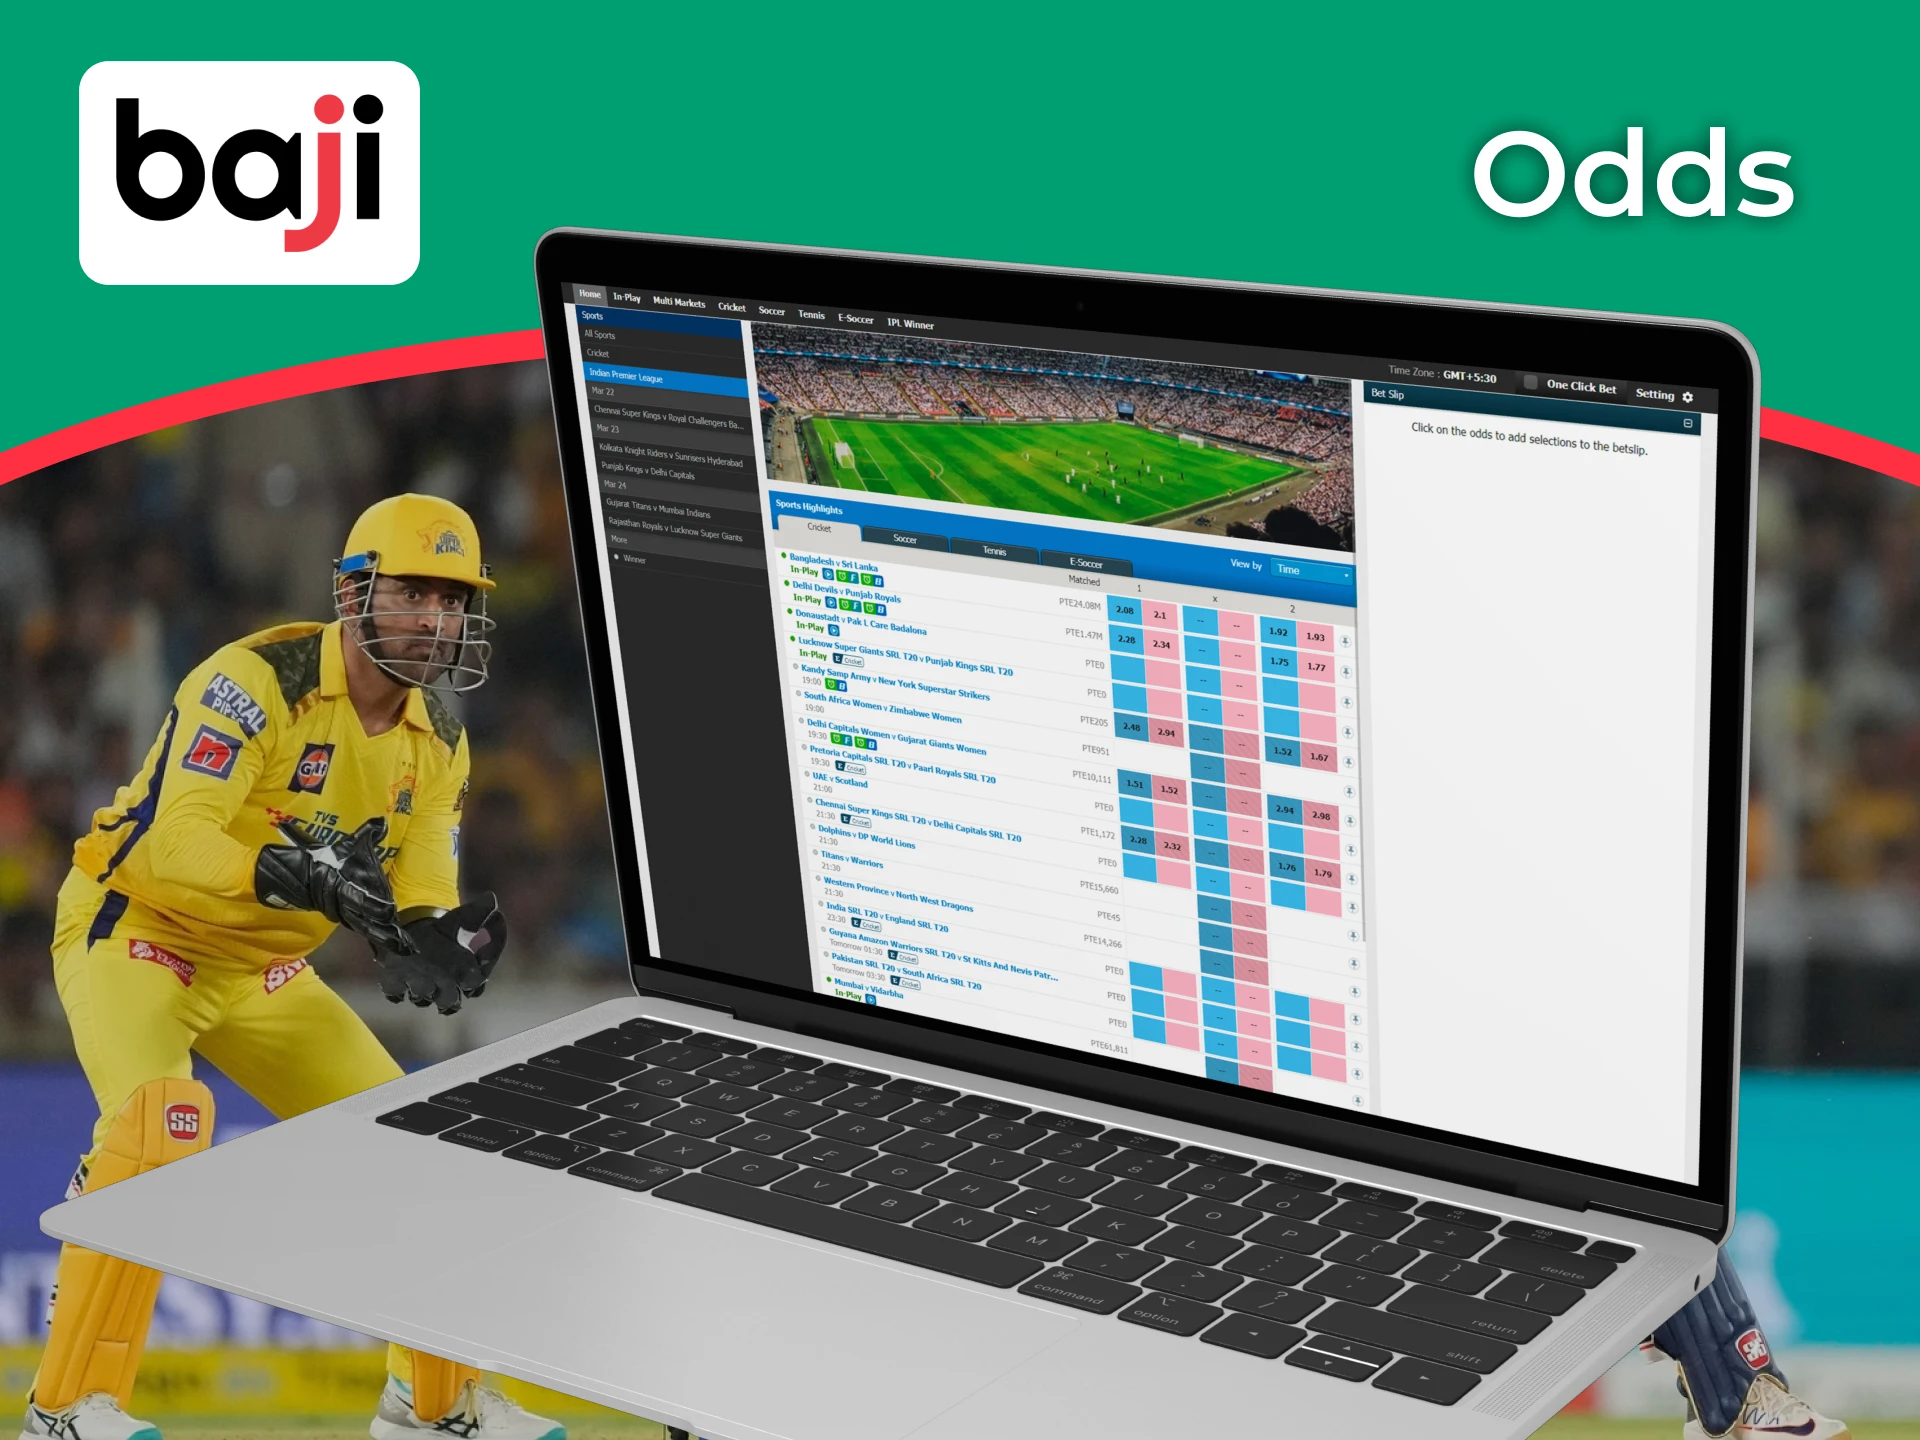 Learn the differences between the types of IPL odds.